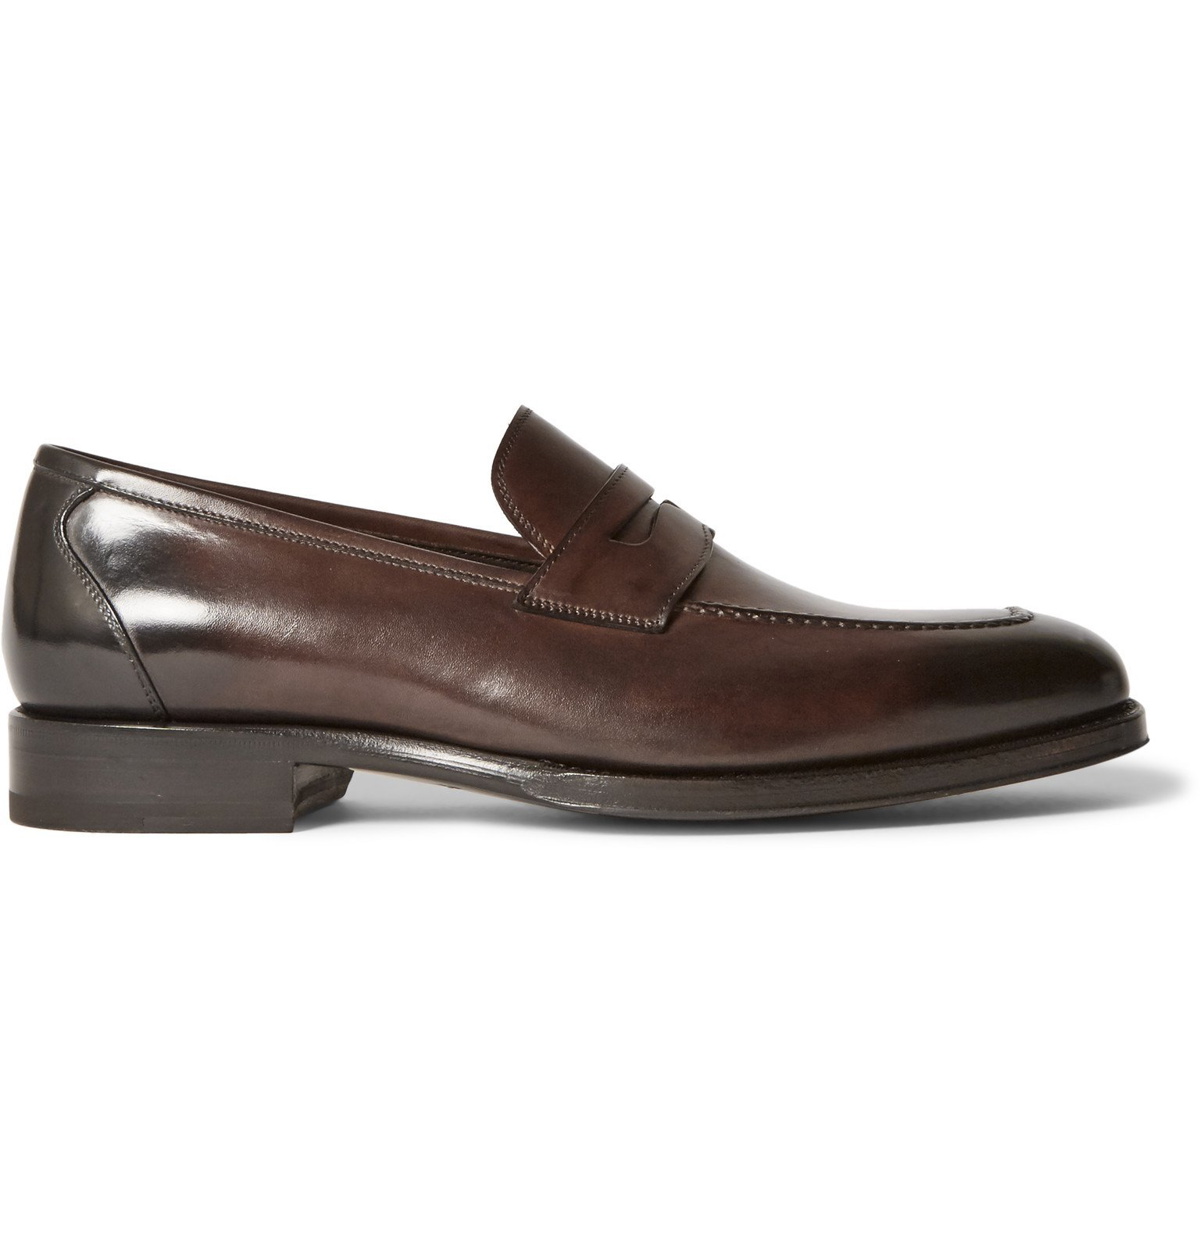 TOM FORD - Wessex Leather Penny Loafers - Brown TOM FORD